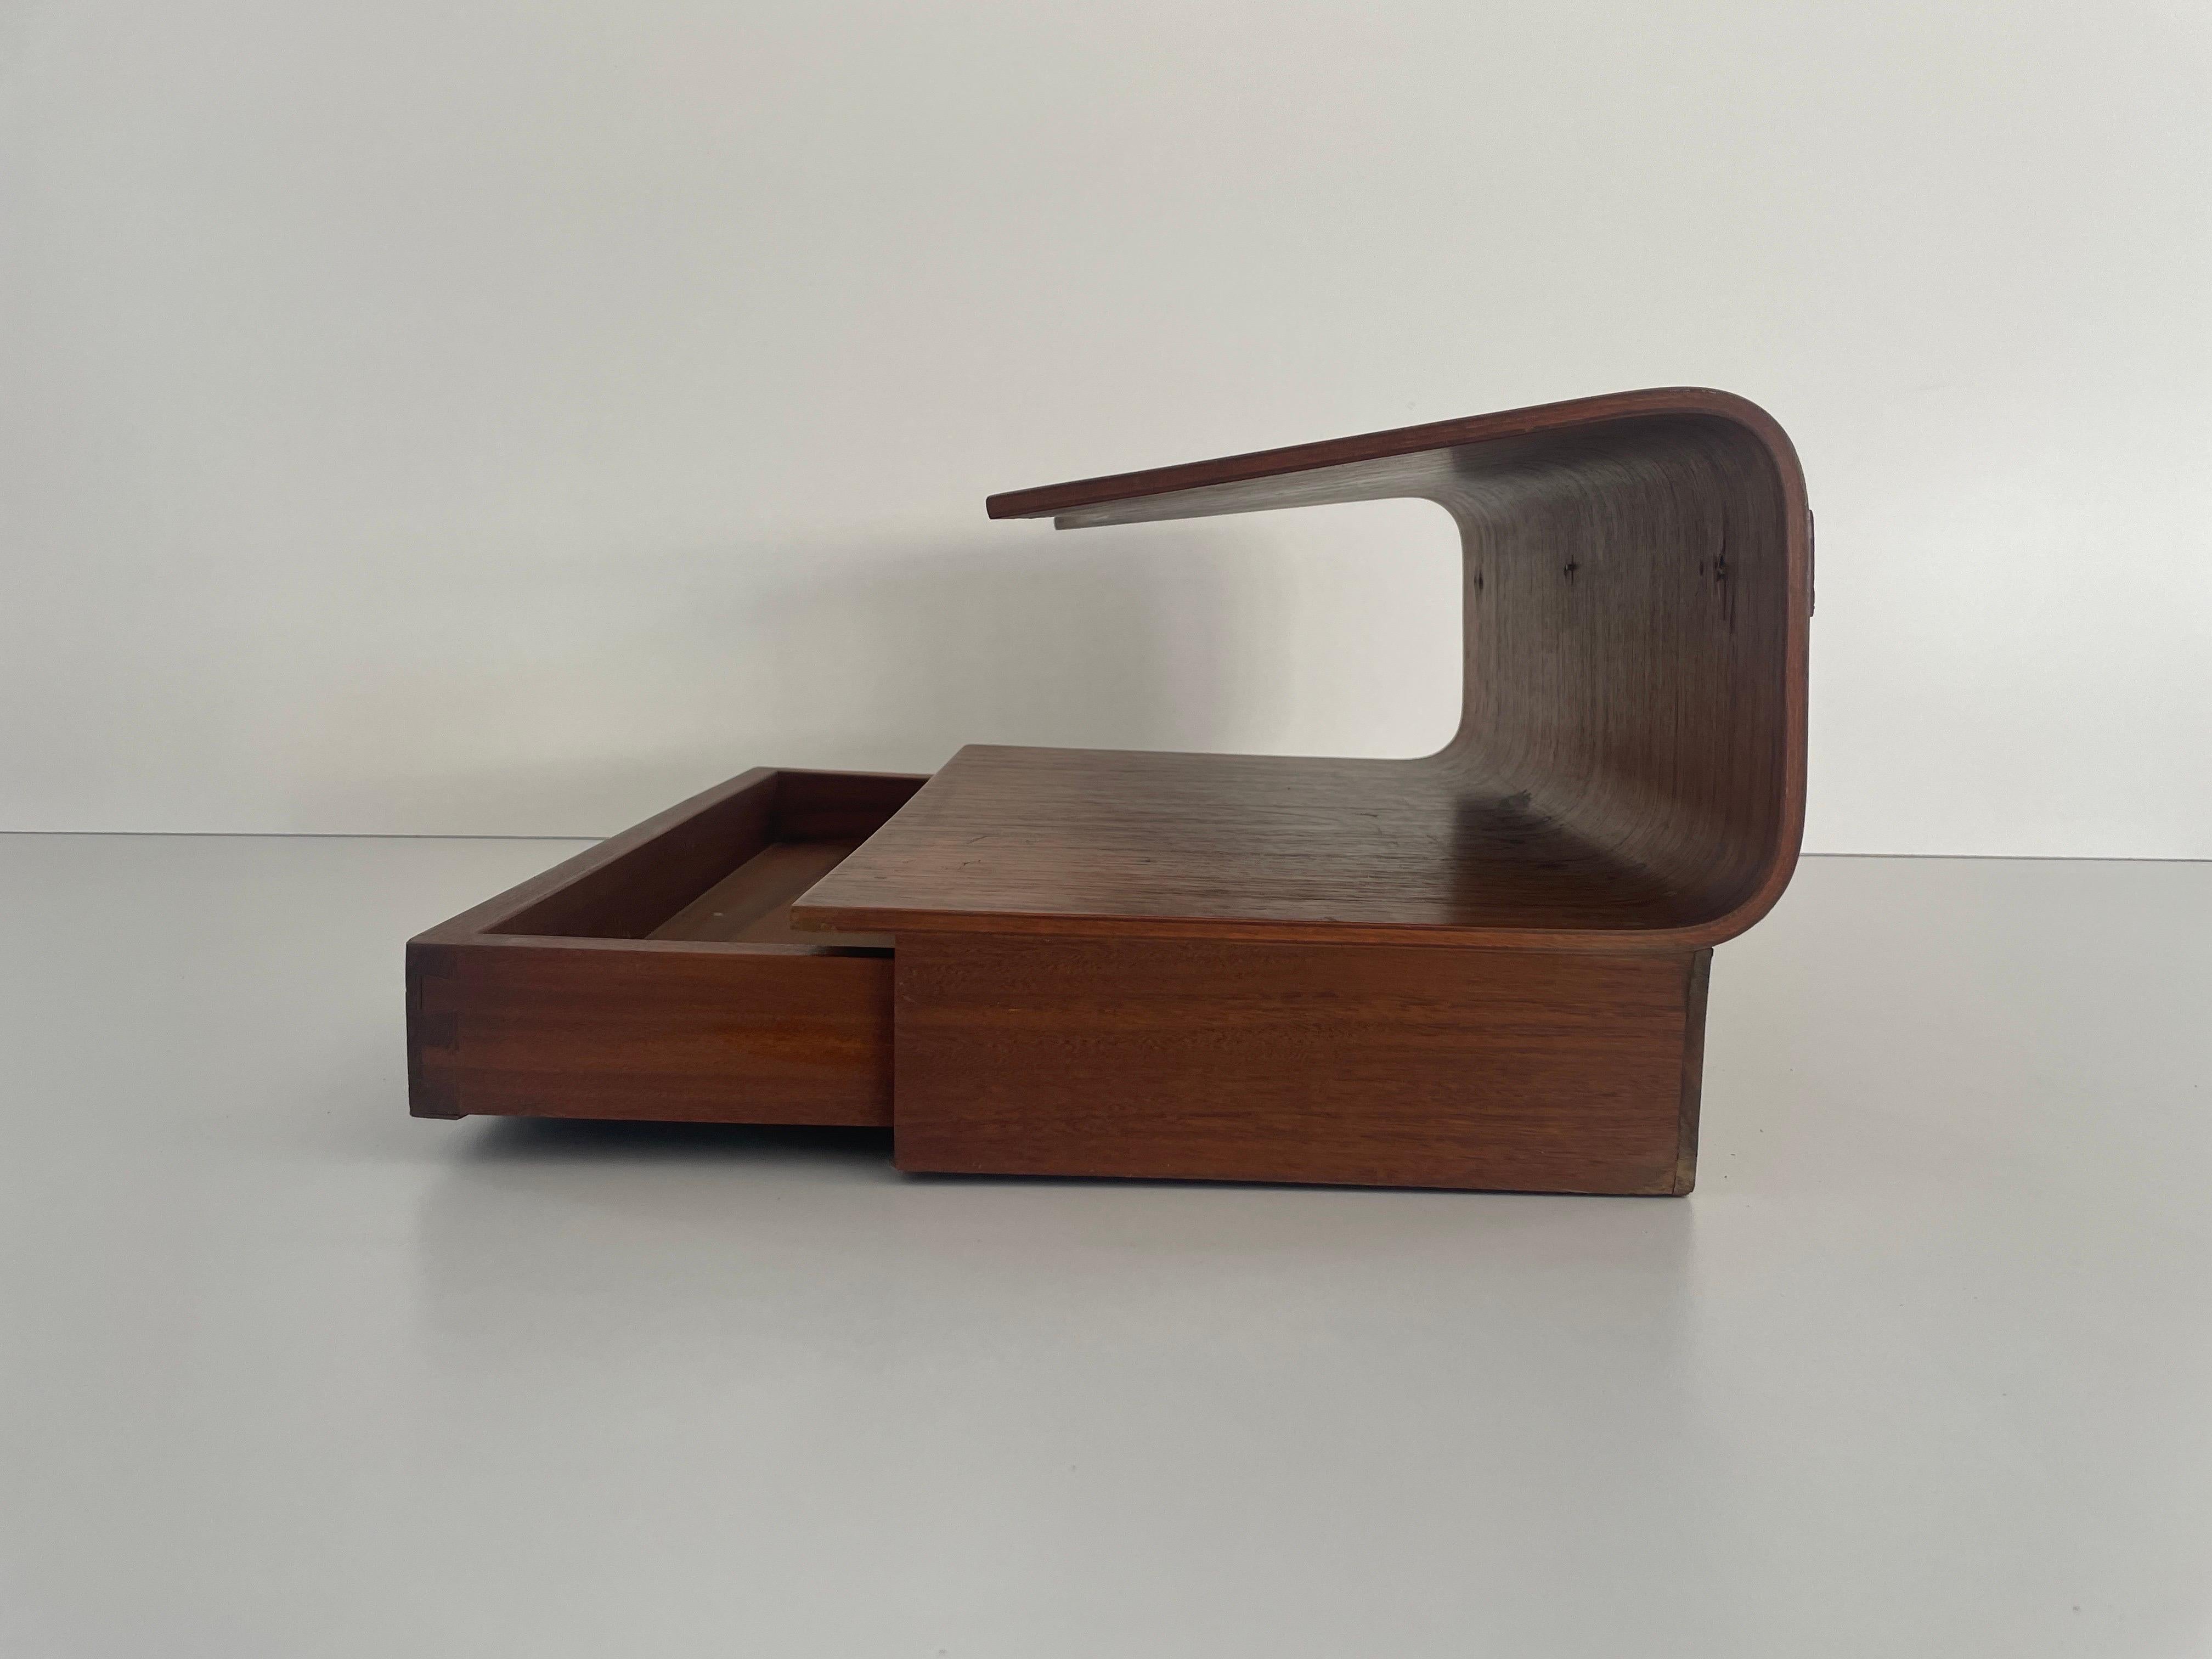 Italian Wood Floating Shelf with Drawer, 1960s, Italy For Sale 5